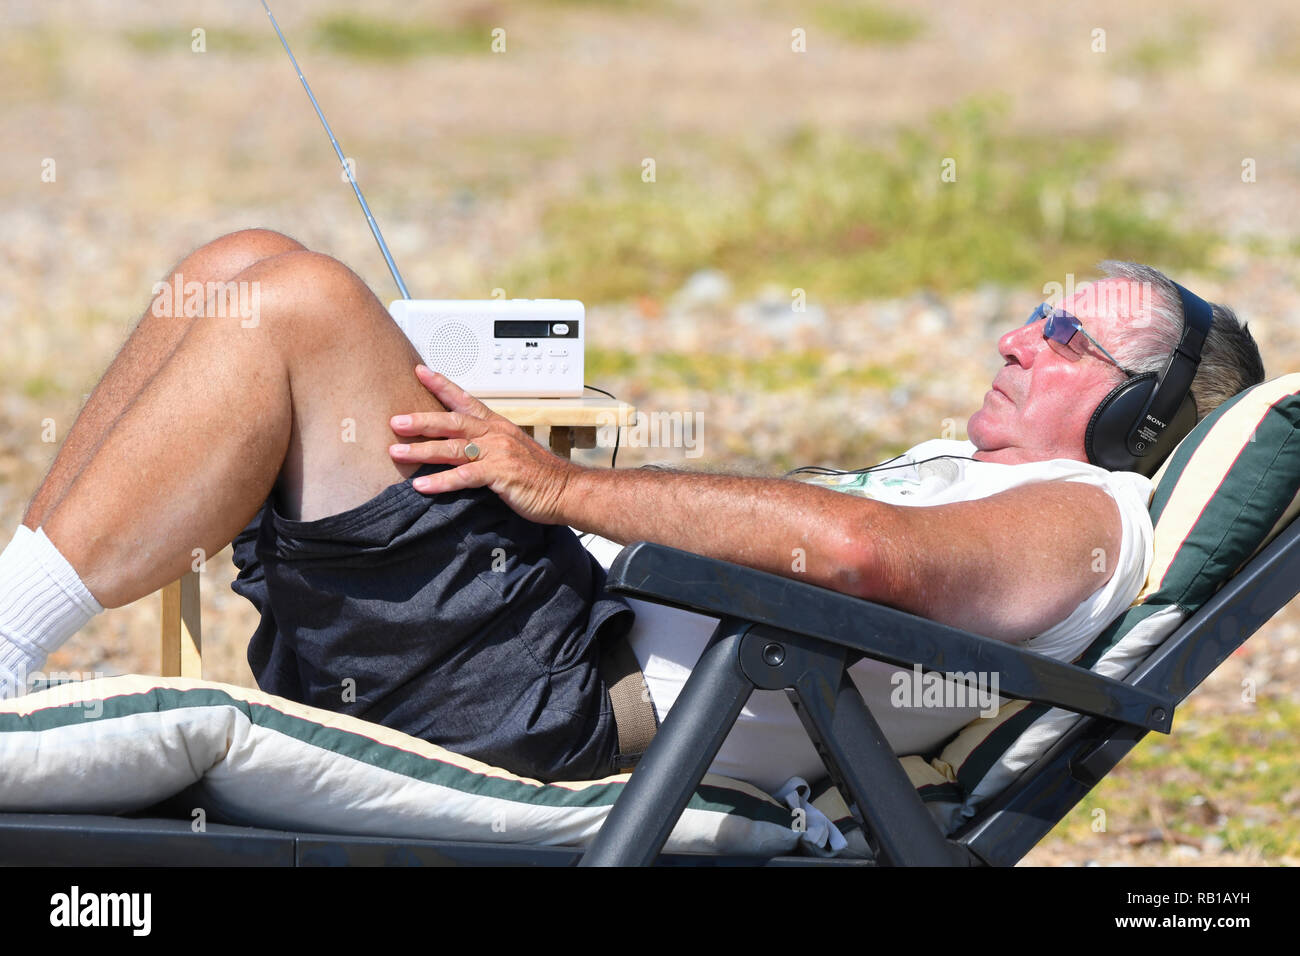 Man laying in the sun in a sun lounger on a beach, while wearing headphones listening to the radio, during the Summer 2018 heatwave in the UK. Stock Photo